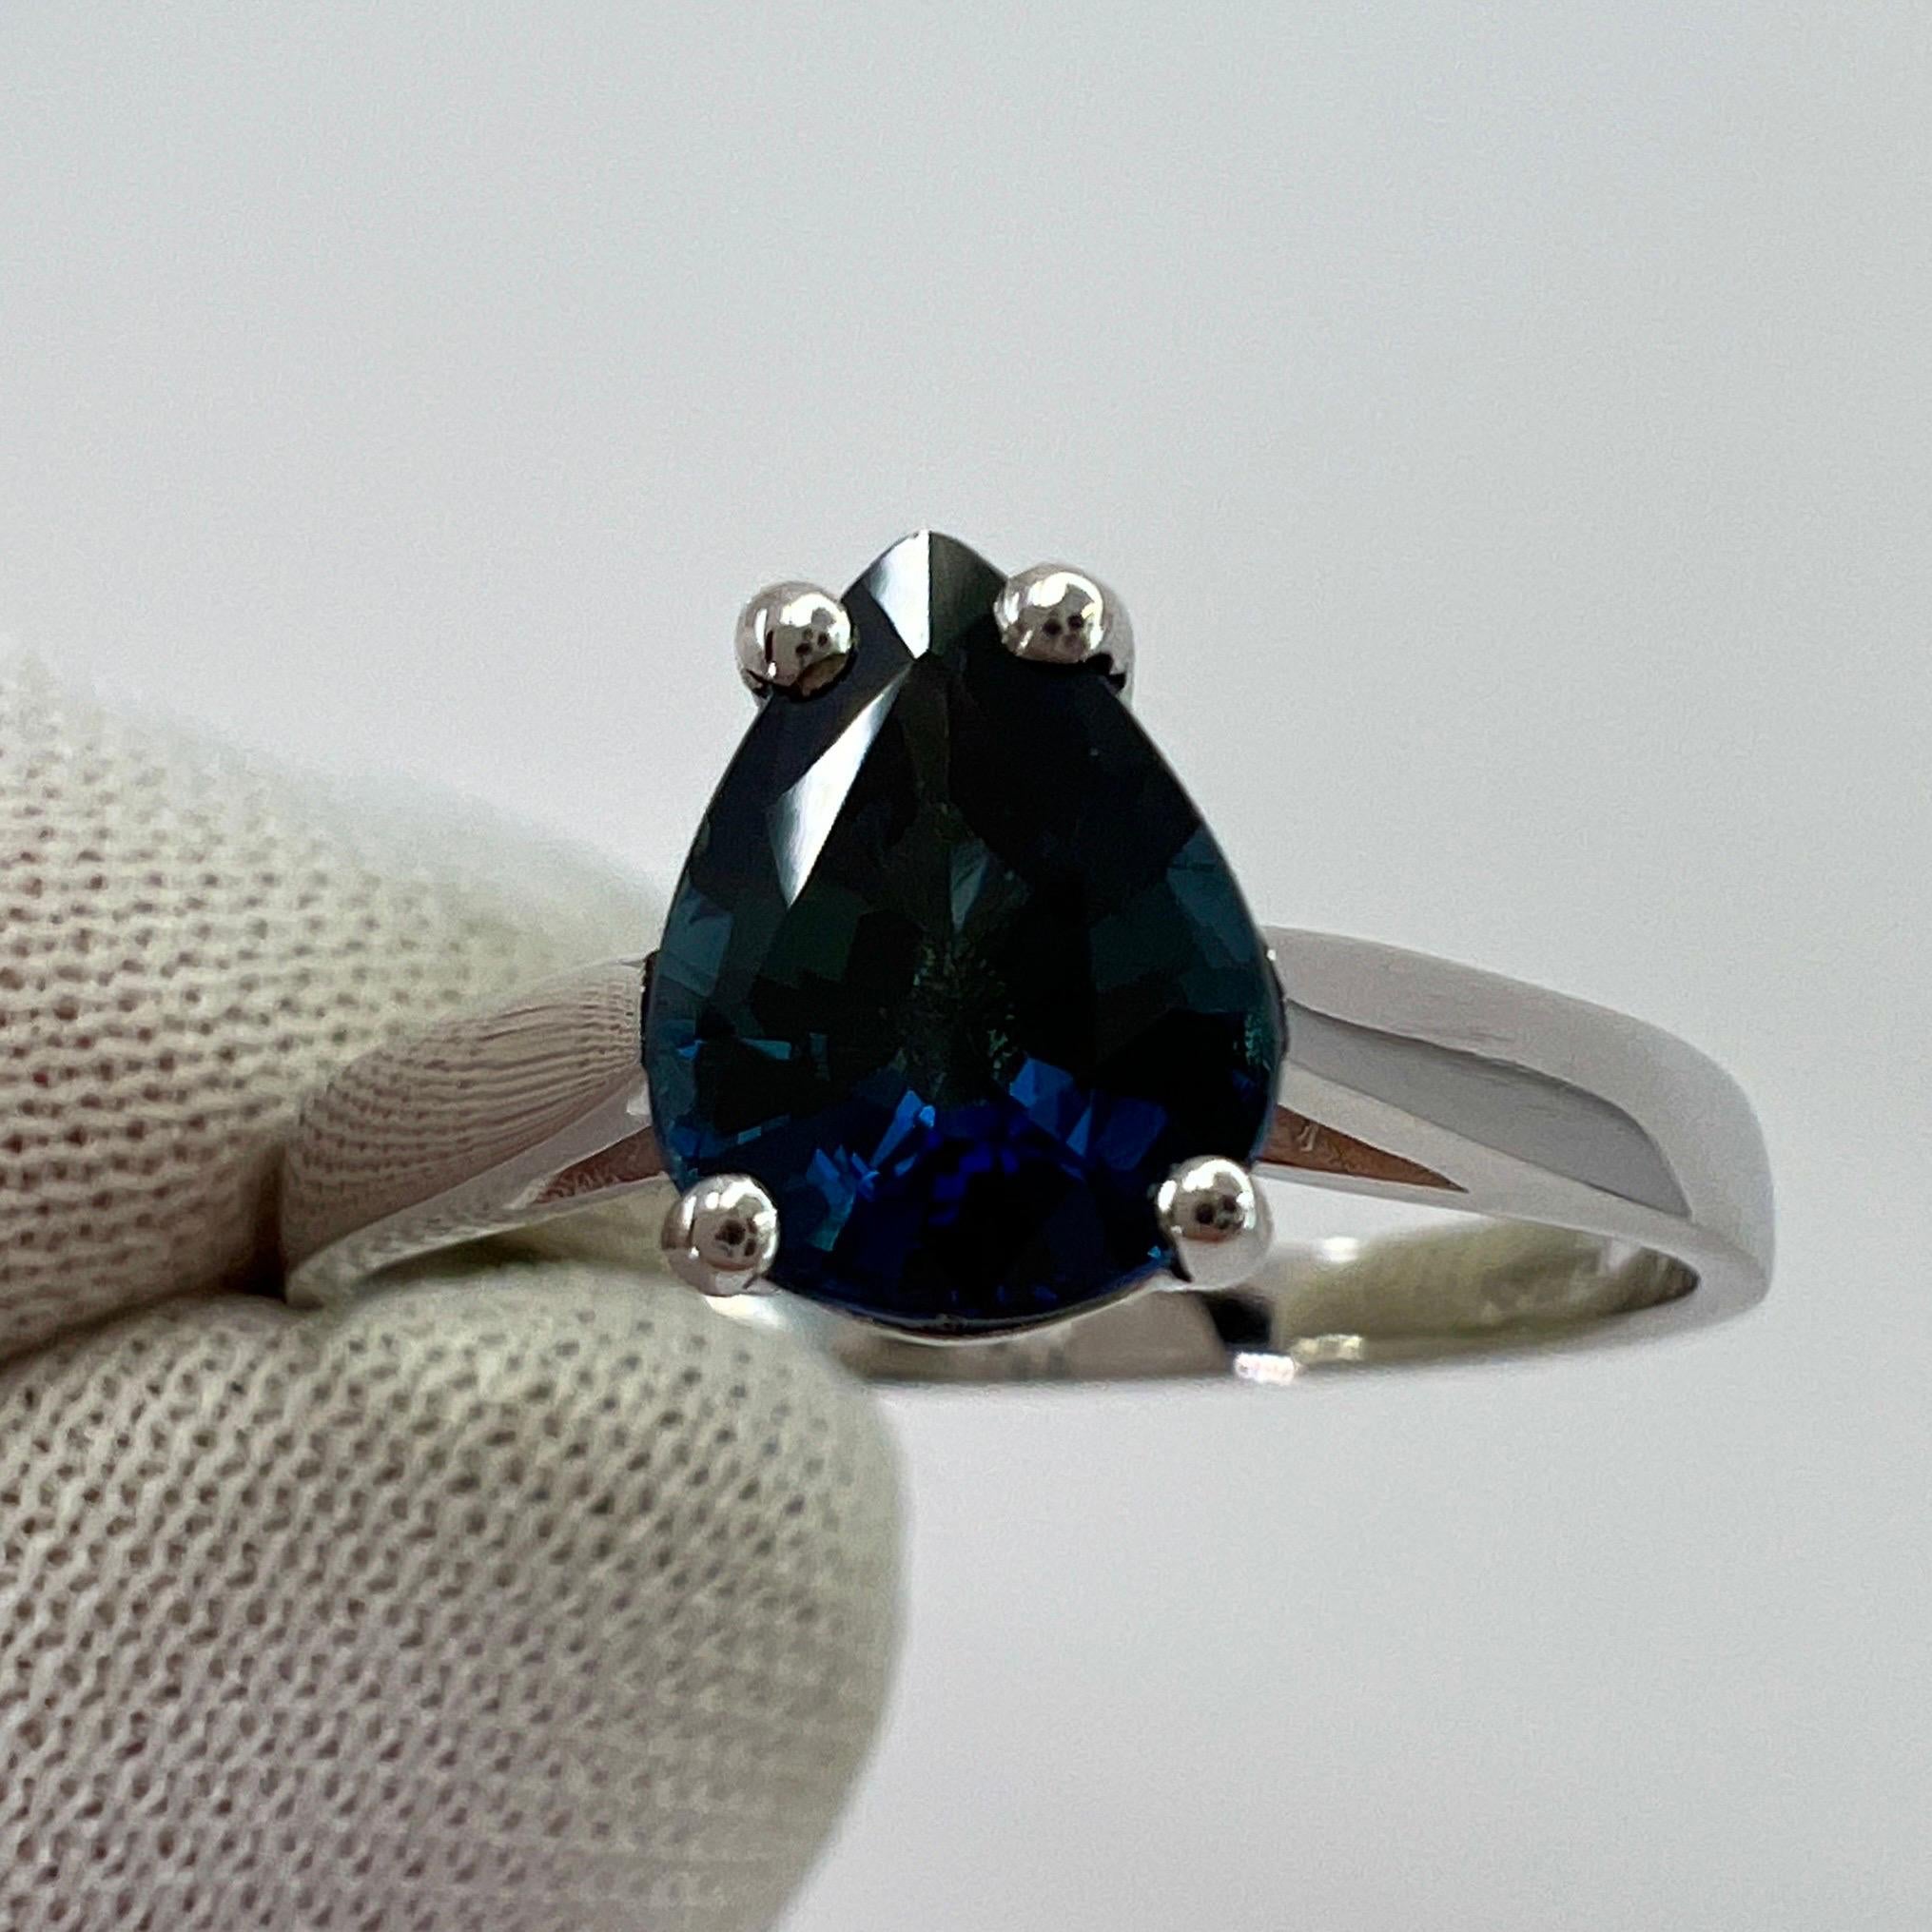 Fine Royal Blue Australian Sapphire Pear Cut 18k White Gold Solitaire Ring.

1.30 Carat sapphire with a stunning deep royal blue colour and excellent clarity. Very clean stone. The sapphire also has an excellent pear teardrop cut which shows lots of